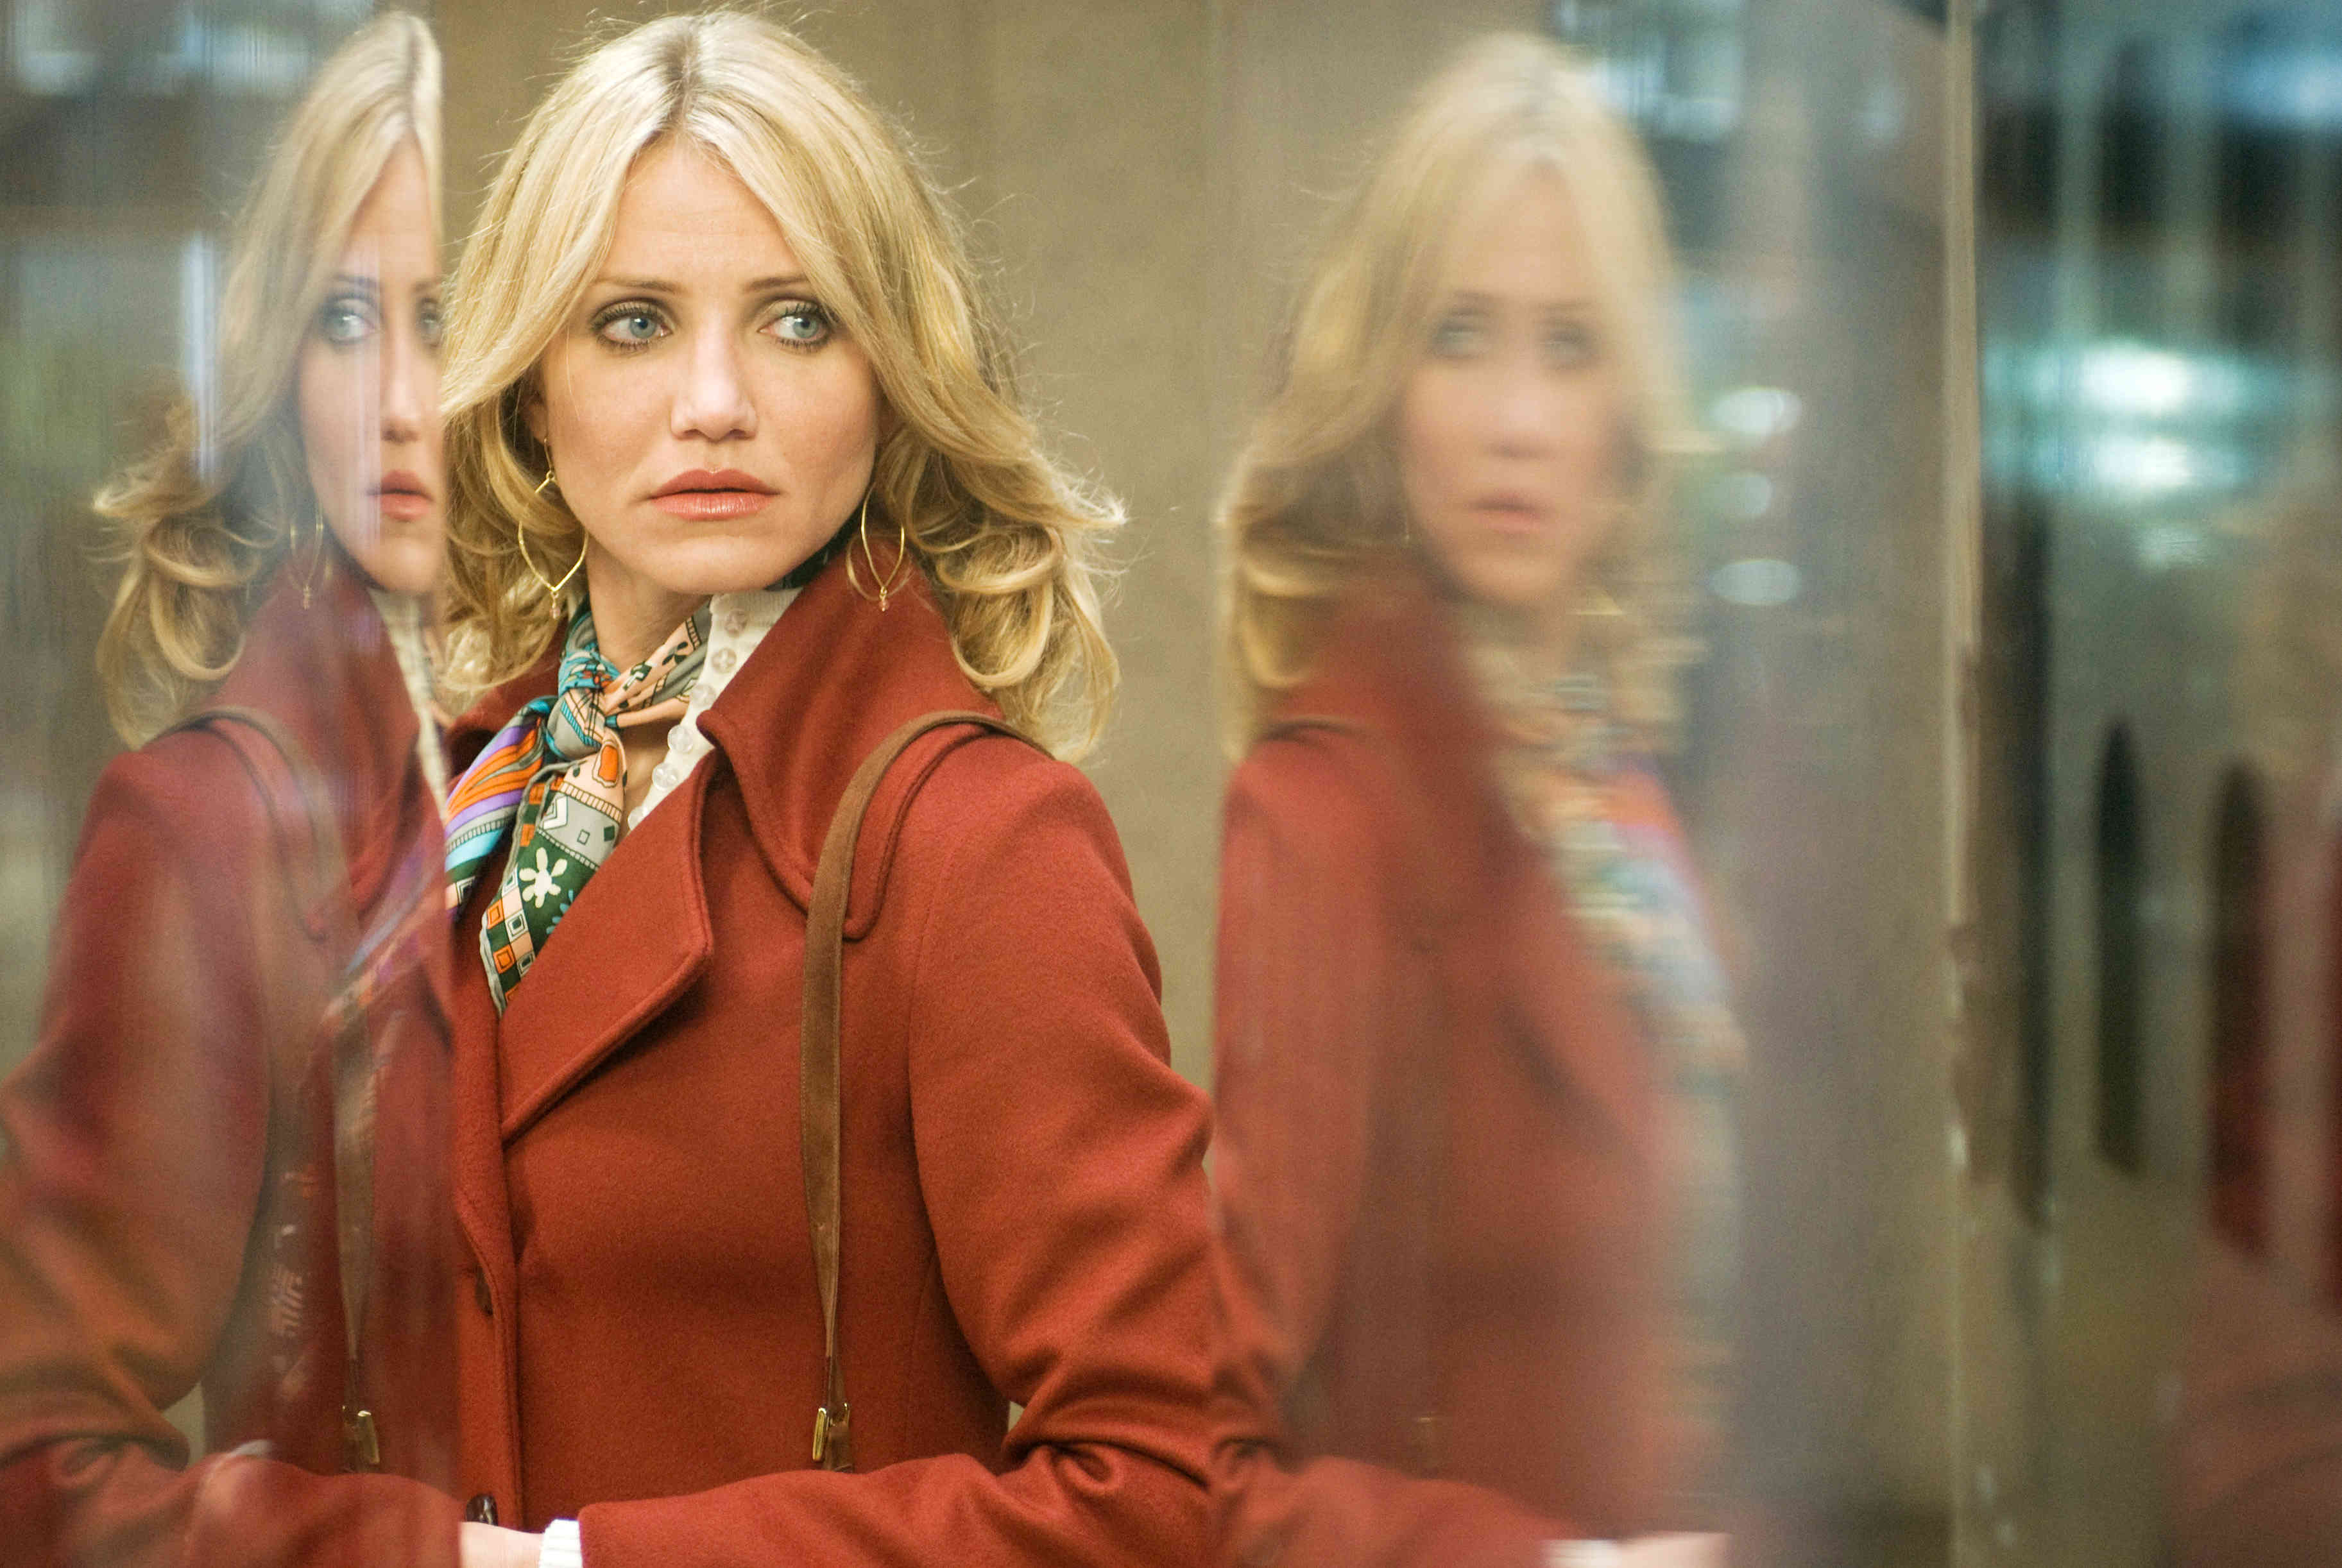 Cameron Diaz stars as Norma Lewis in Warner Bros. Pictures' The Box (2009). Photo credit by Dale Robinette.